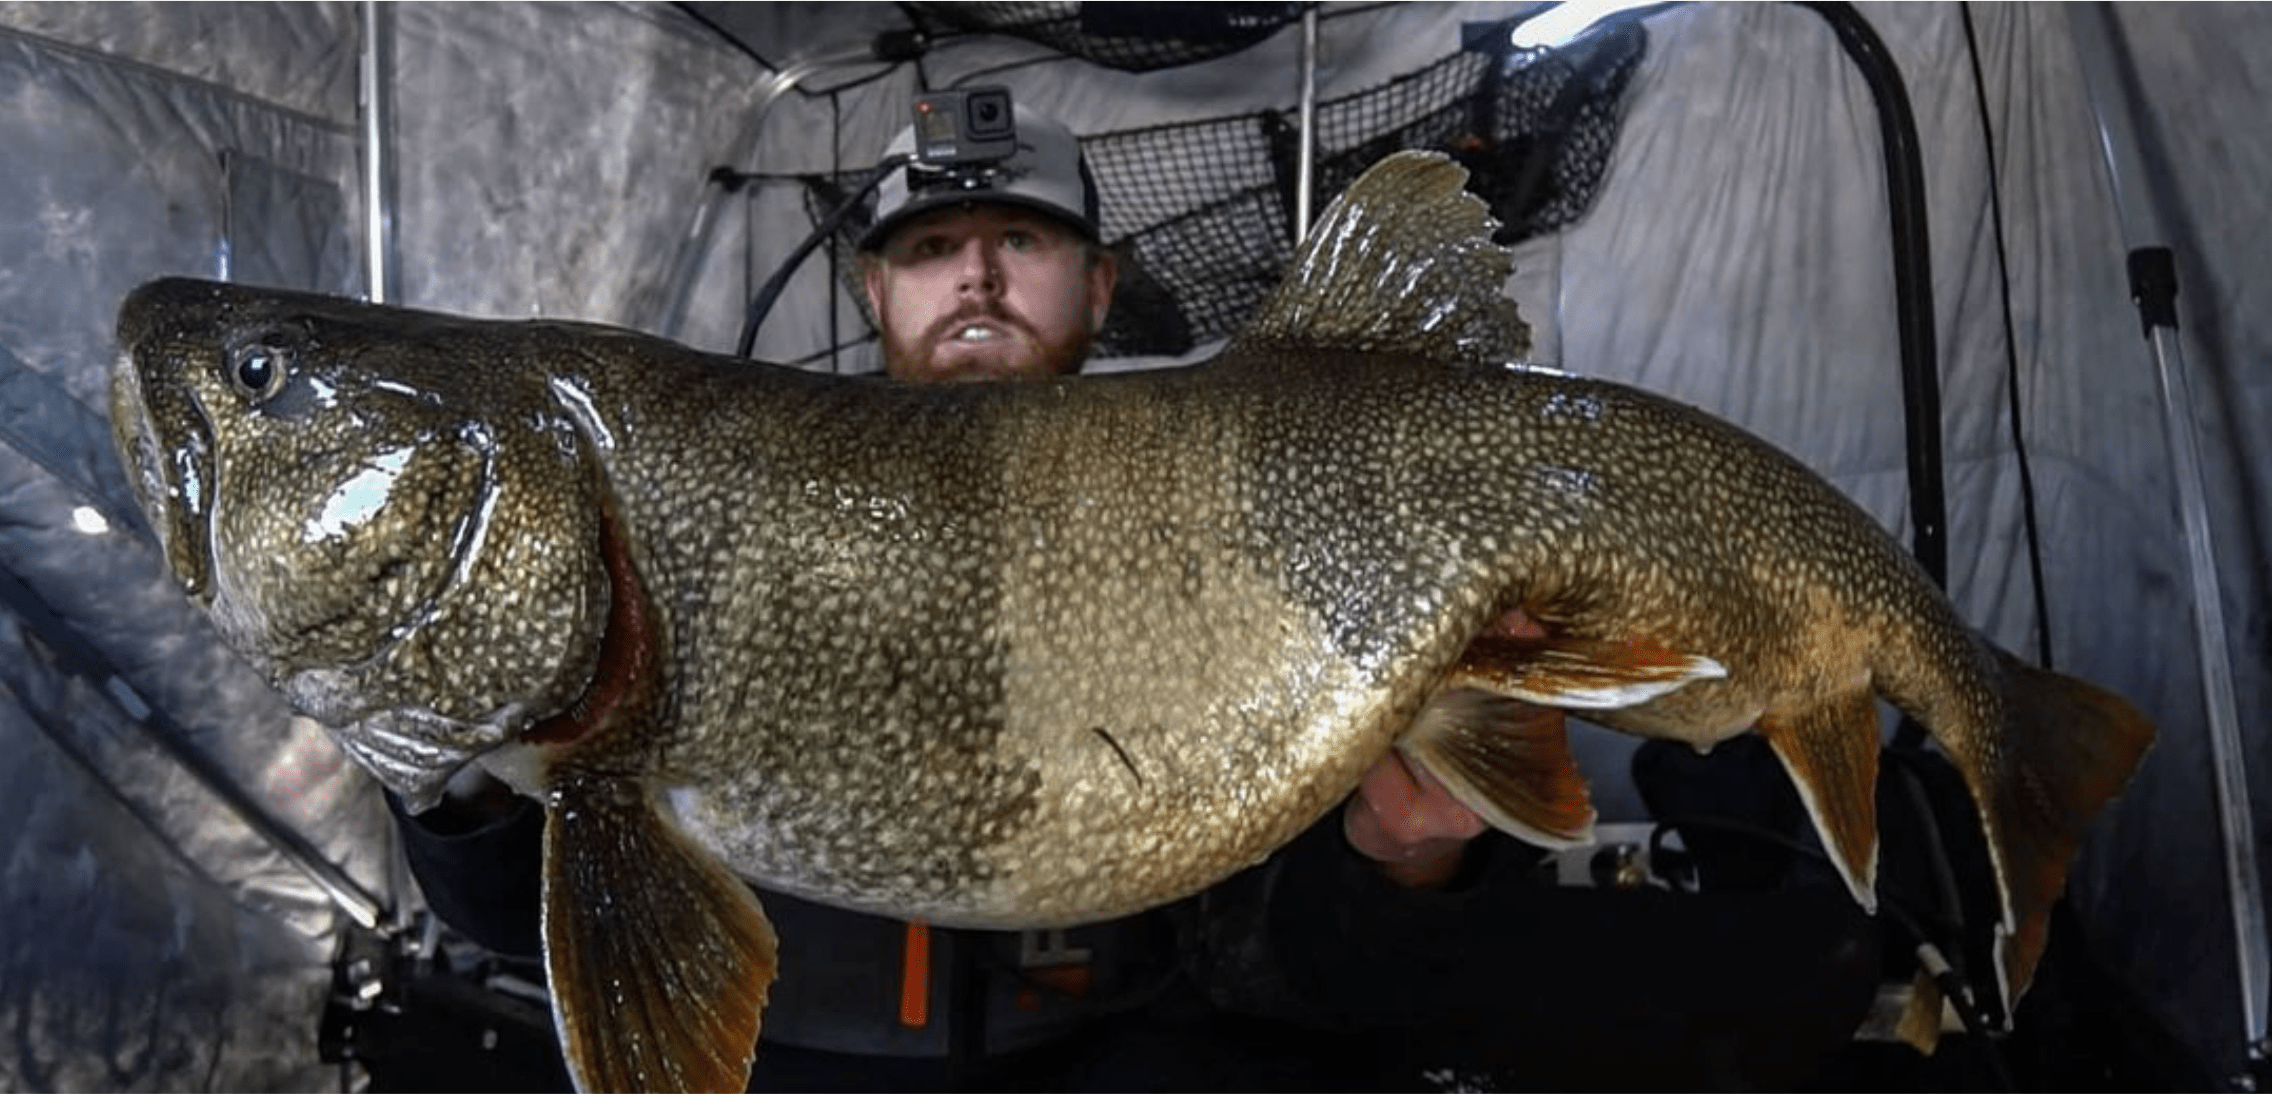 Watch: Canadian Ice Fisherman Catches Giant Lake Trout